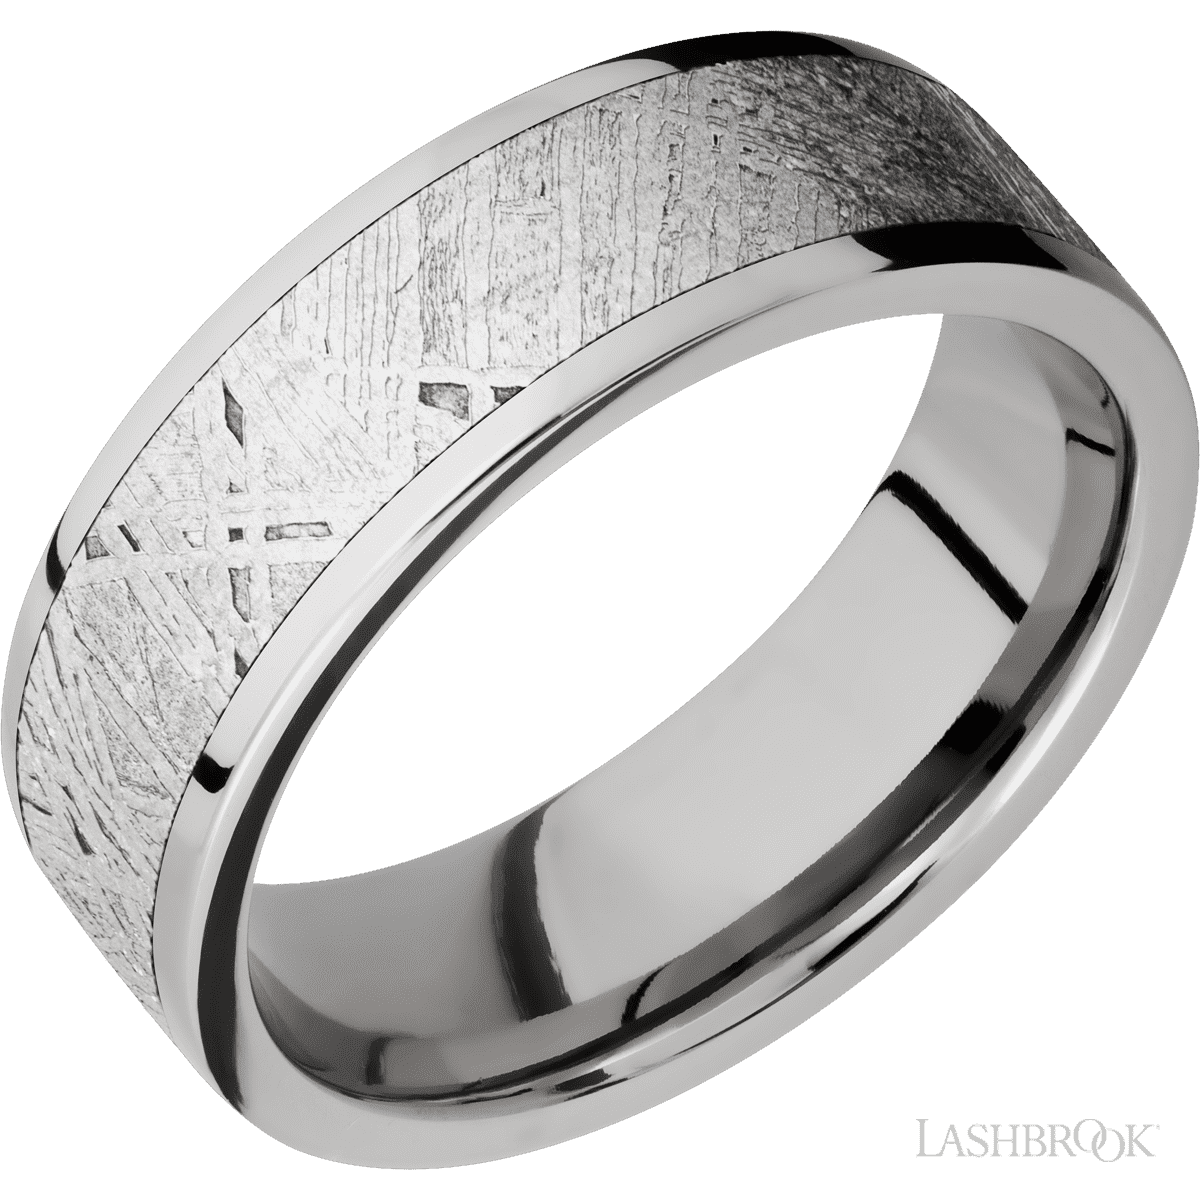 7 mm wide/Flat/Titanium band with one 5 mm Centered inlay of Meteorite